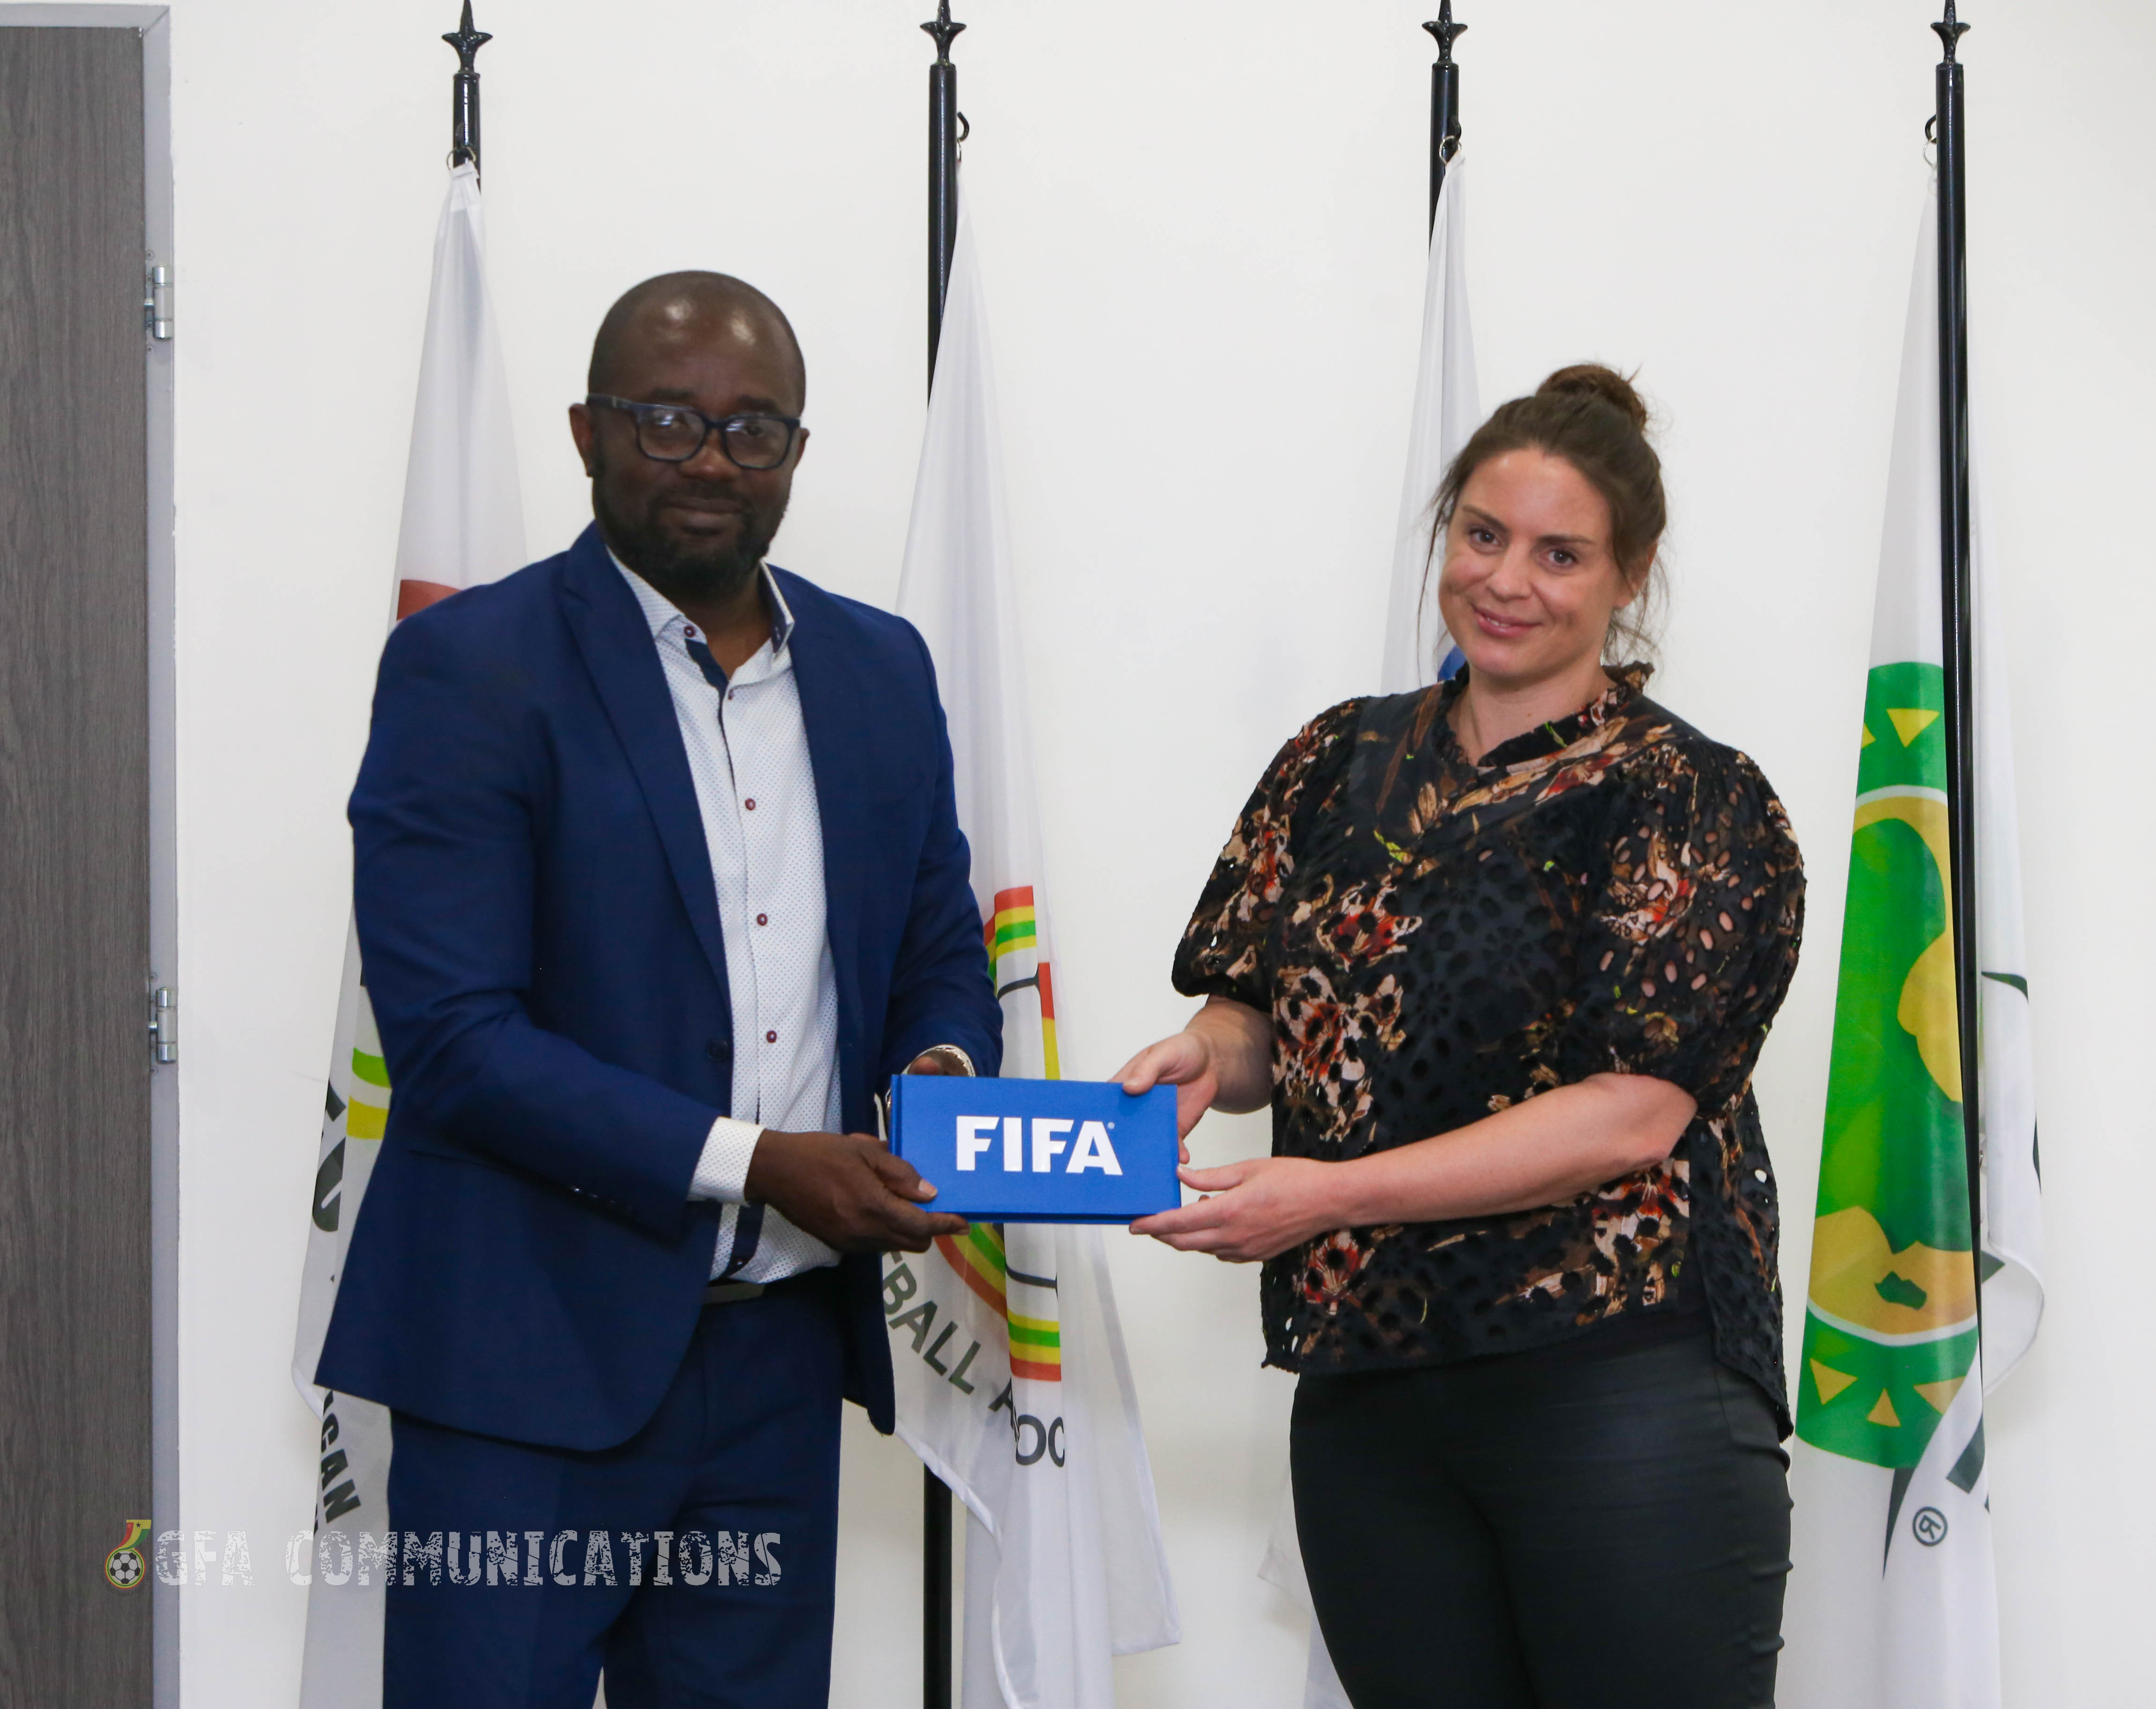 FIFA Compliance Manager Claire Cogswell visits Secretariat for insight into compliance activities